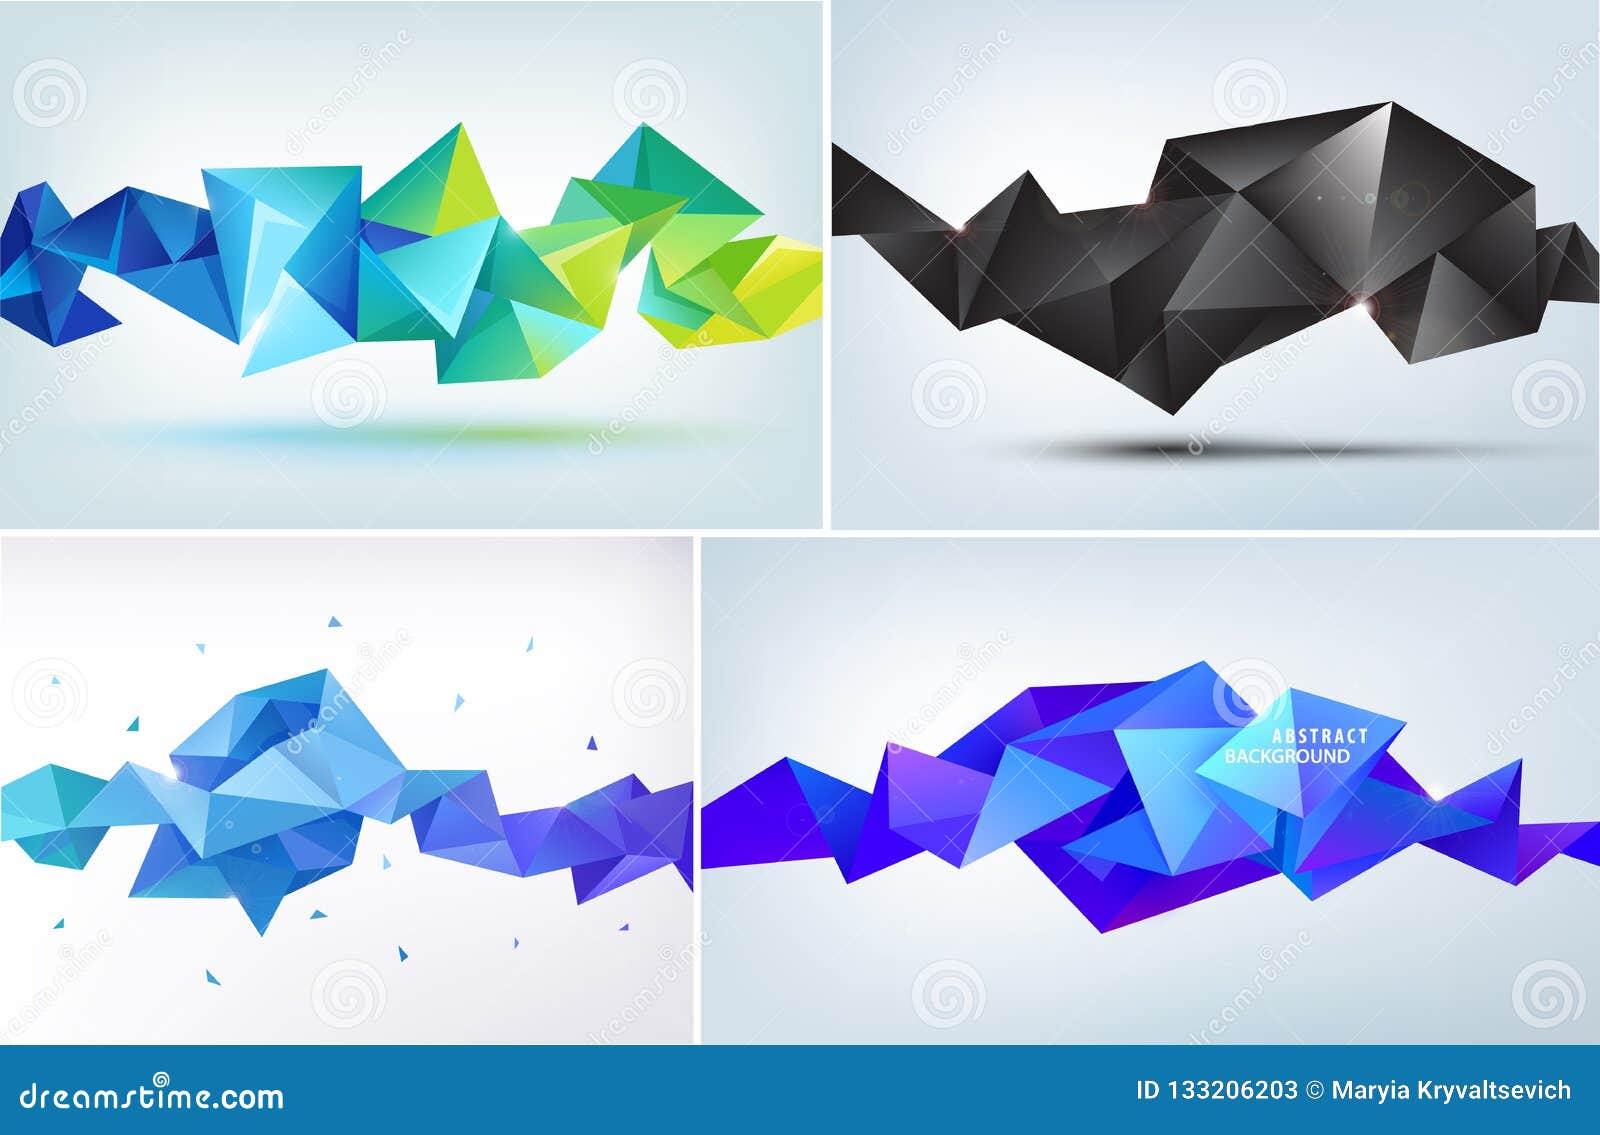  set of abstract geometric 3d facet s, horizontal banners, backgrounds, wallpapers.